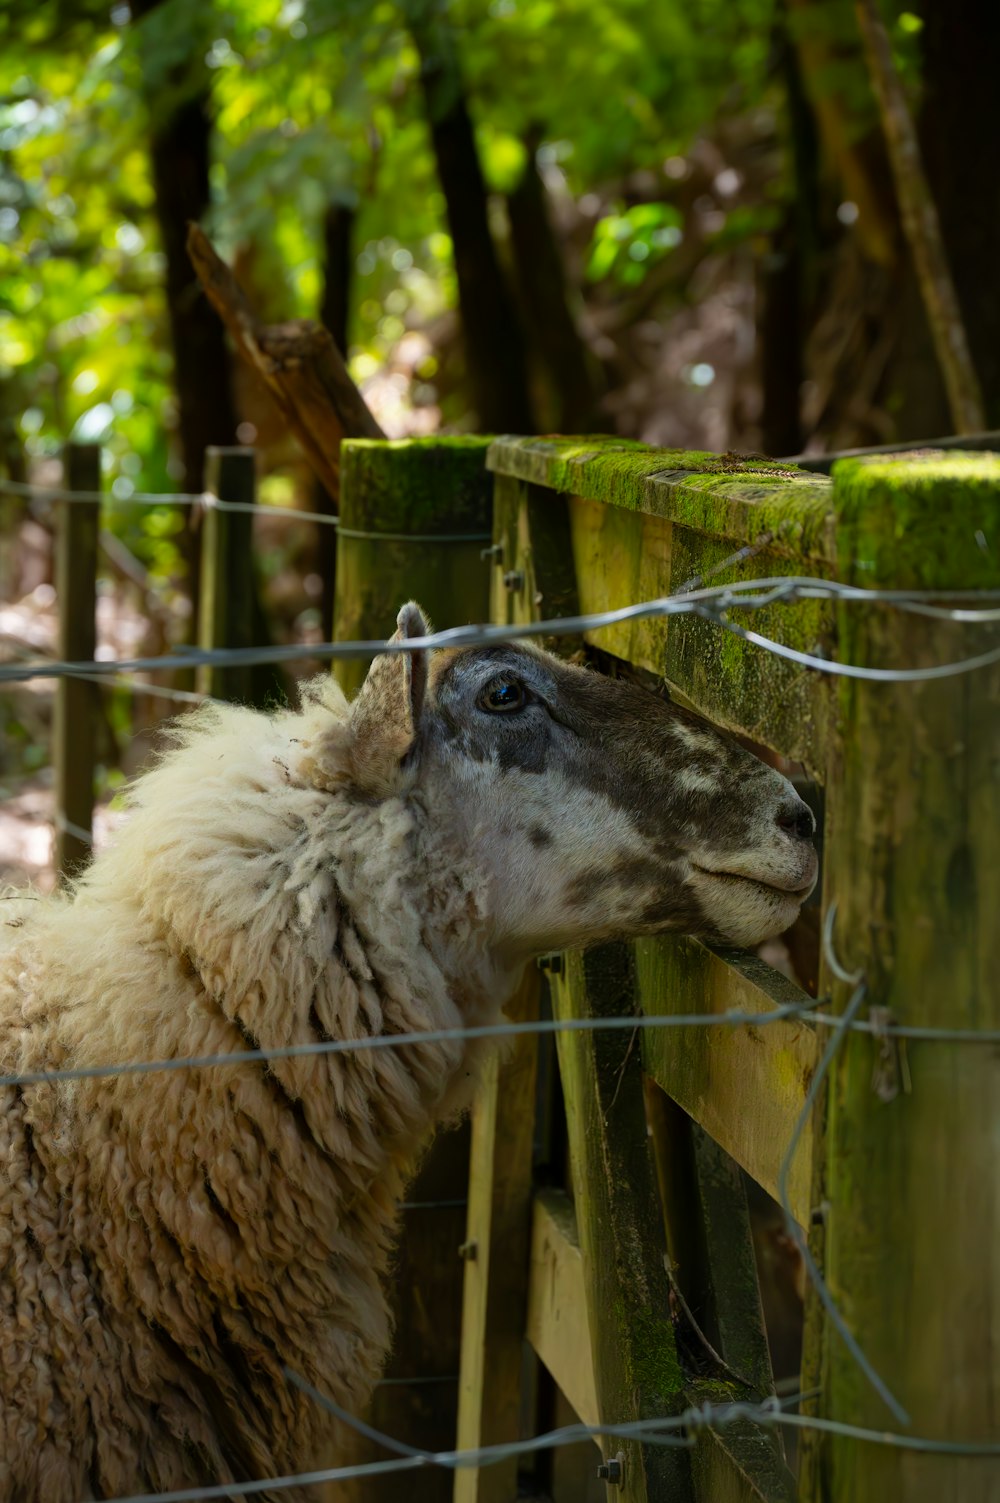 a sheep standing next to a wooden fence